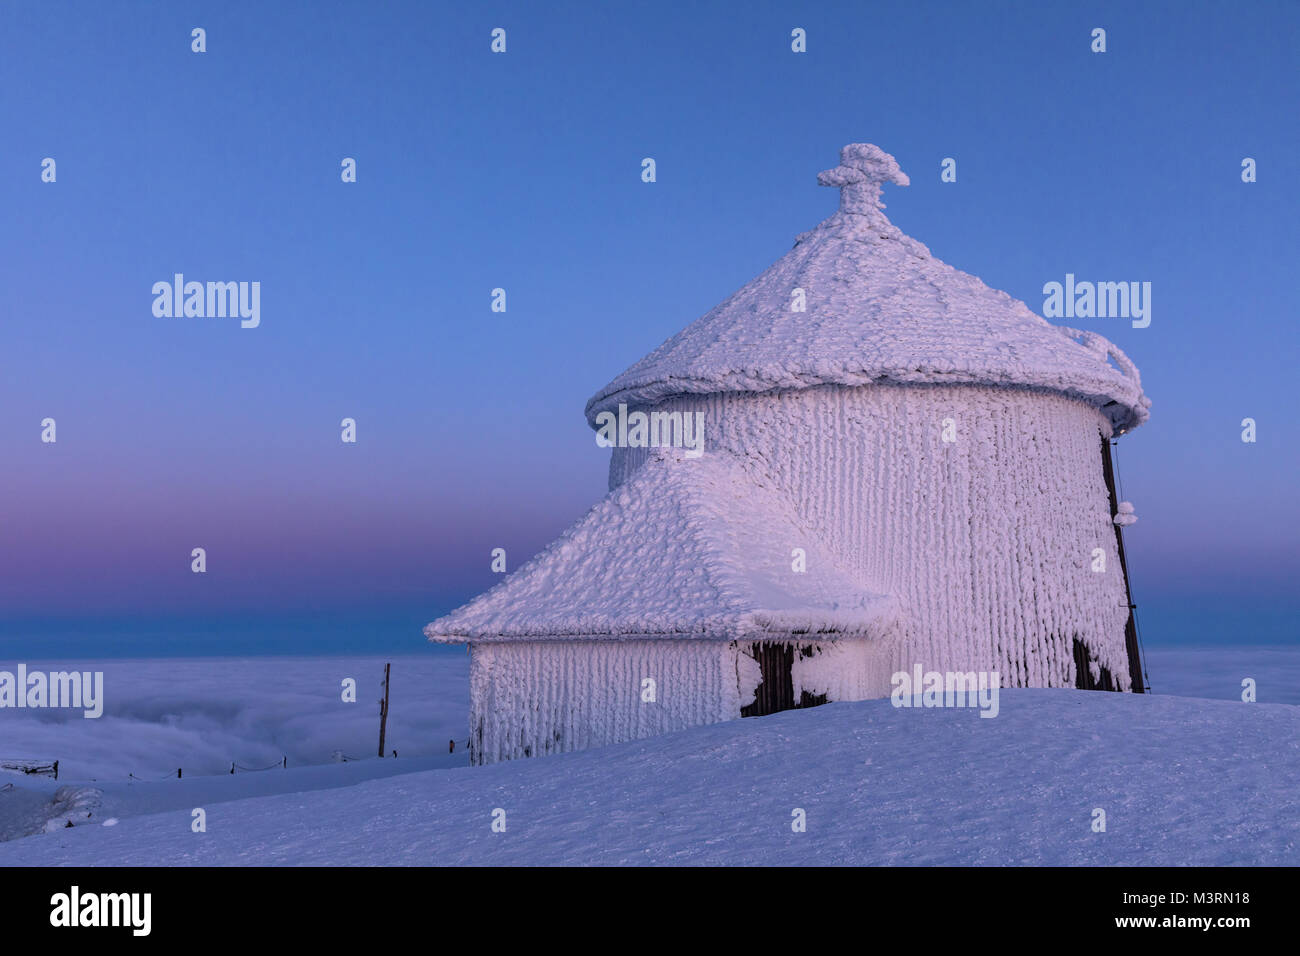 The peak of the Snezka Mountain in winter in the Krkonose Mountains. Snezka, Krkonose mouintain, Czech Republic, Europe. Snezka after a sunset tinged  Stock Photo